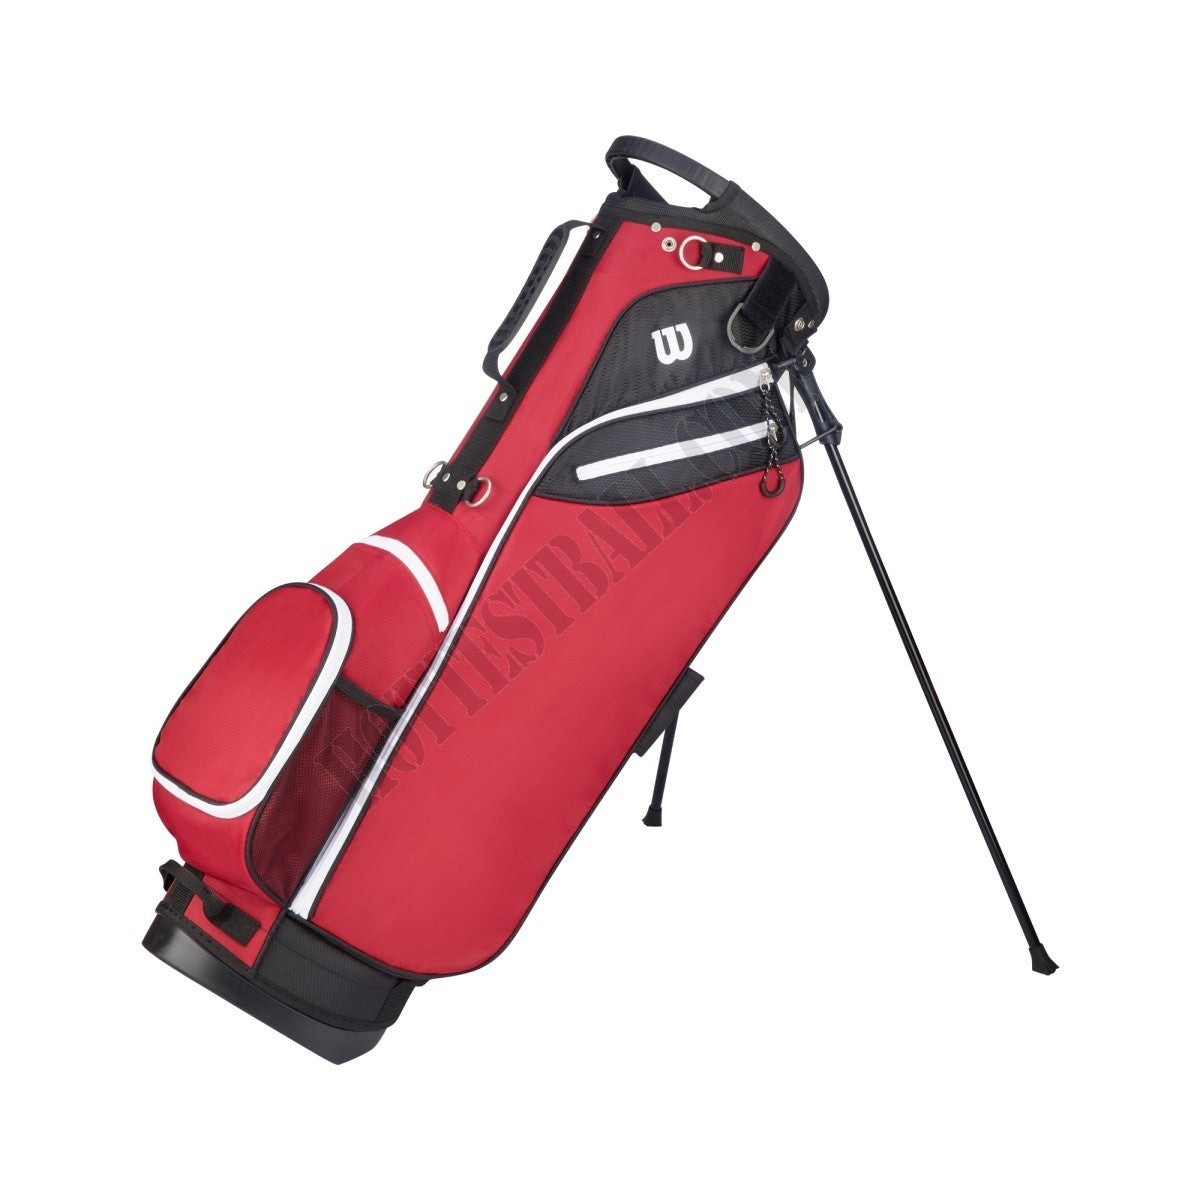 W Carry Golf Bag - Wilson Discount Store - W Carry Golf Bag - Wilson Discount Store